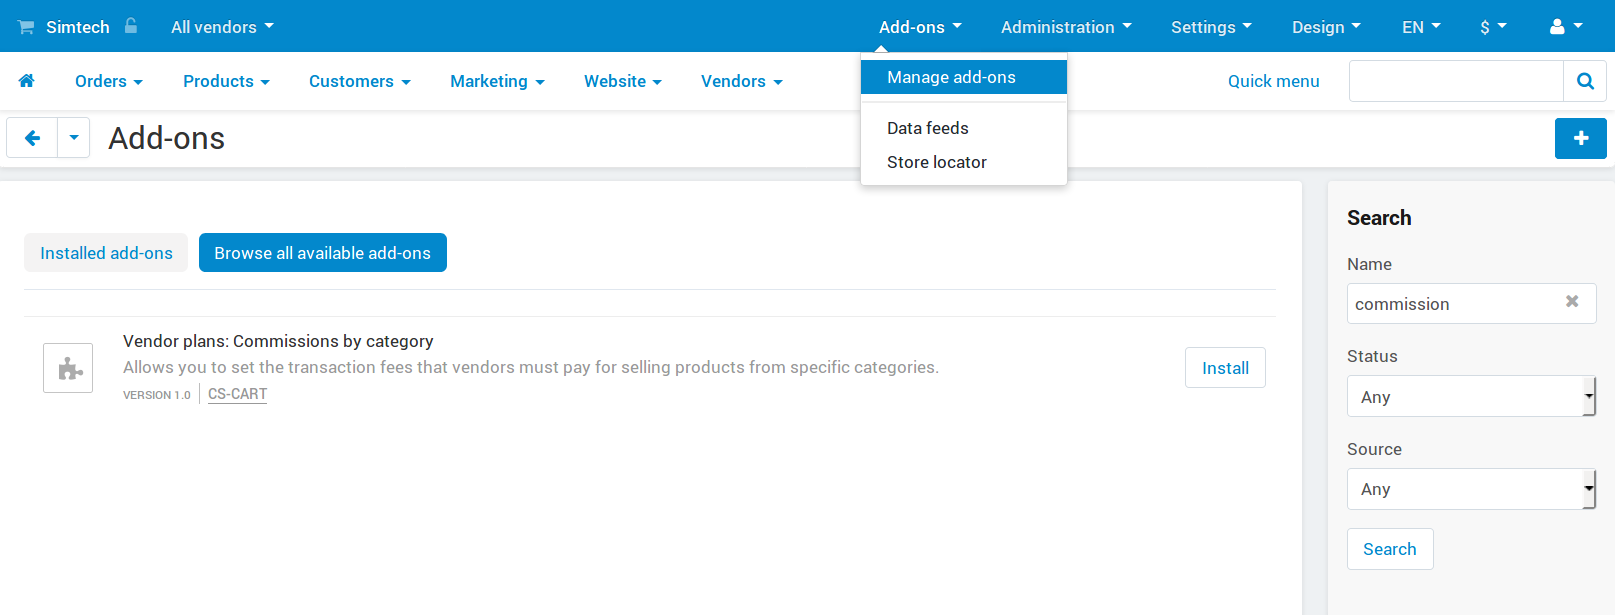 The "Vendor plans: Commissions by category" add-on on the list of add-ons.